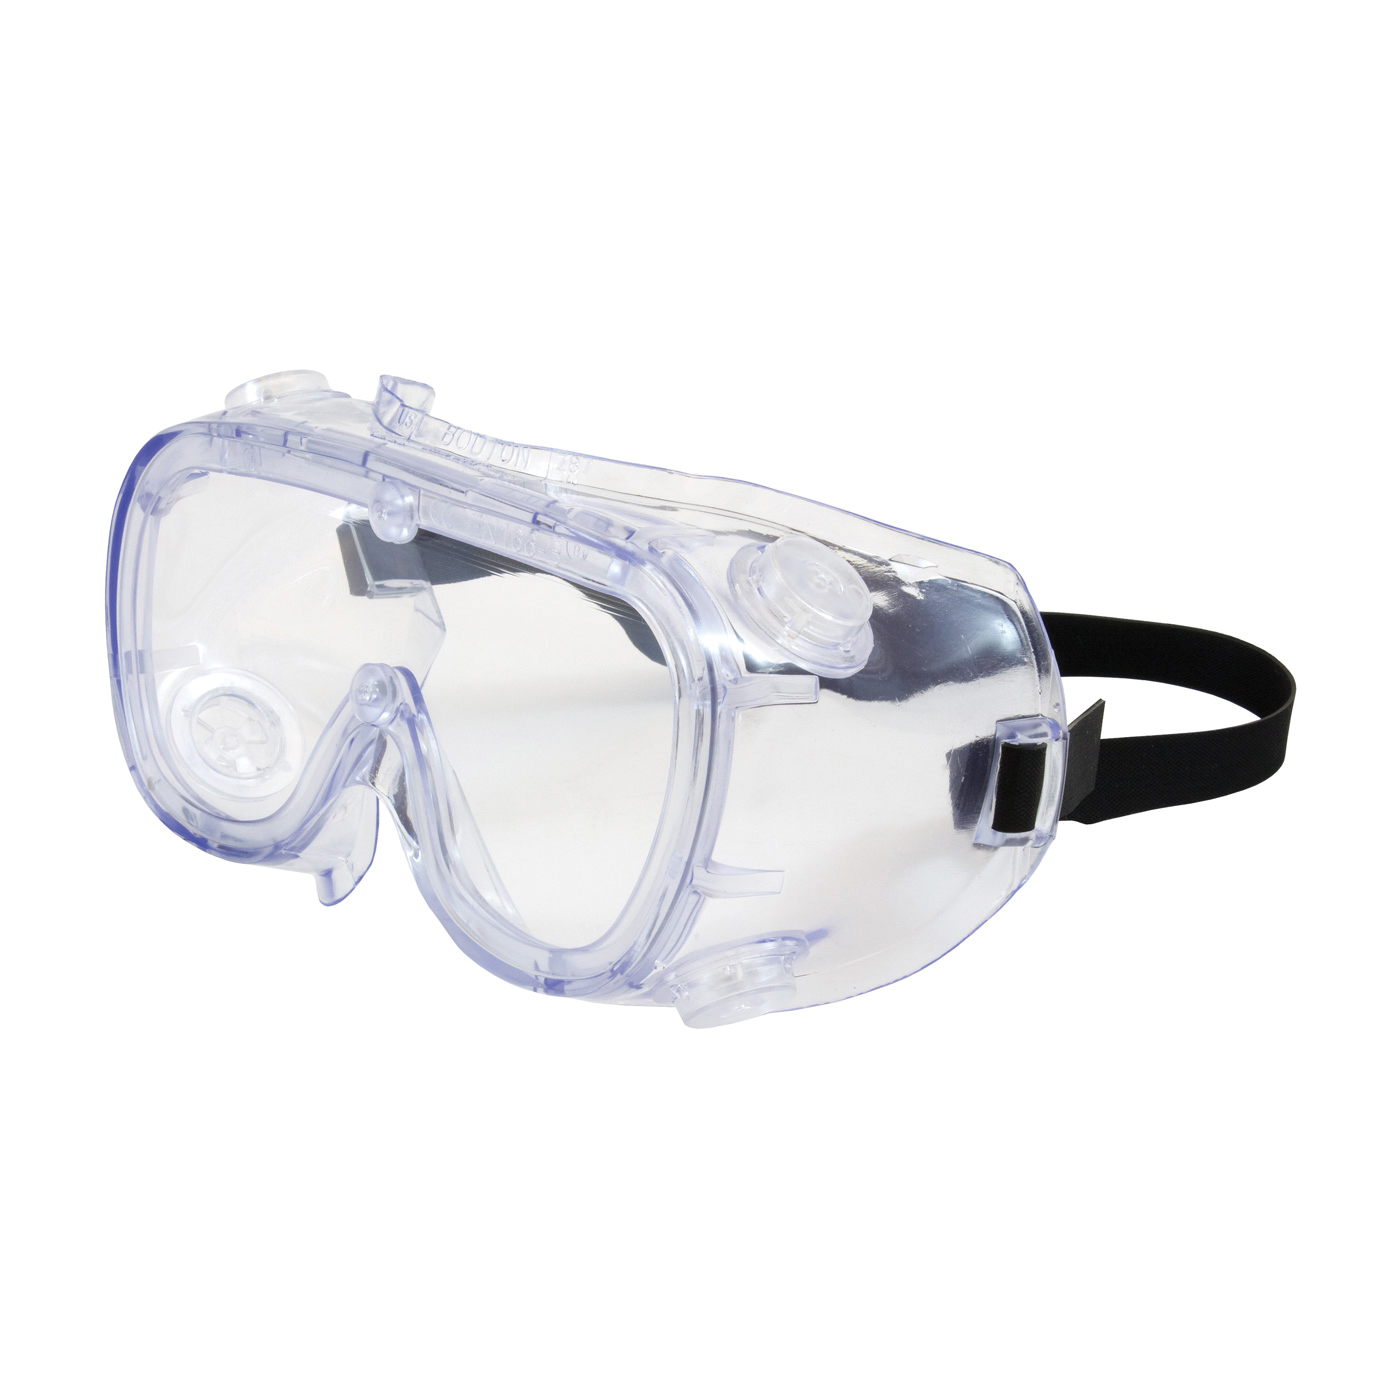 Bouton® 248-5190-400B Softsides™ 551 Protective Goggles, Anti-Fog/Anti-Scratch Clear Polycarbonate Lens, Elastic Strap, ANSI Z87.1